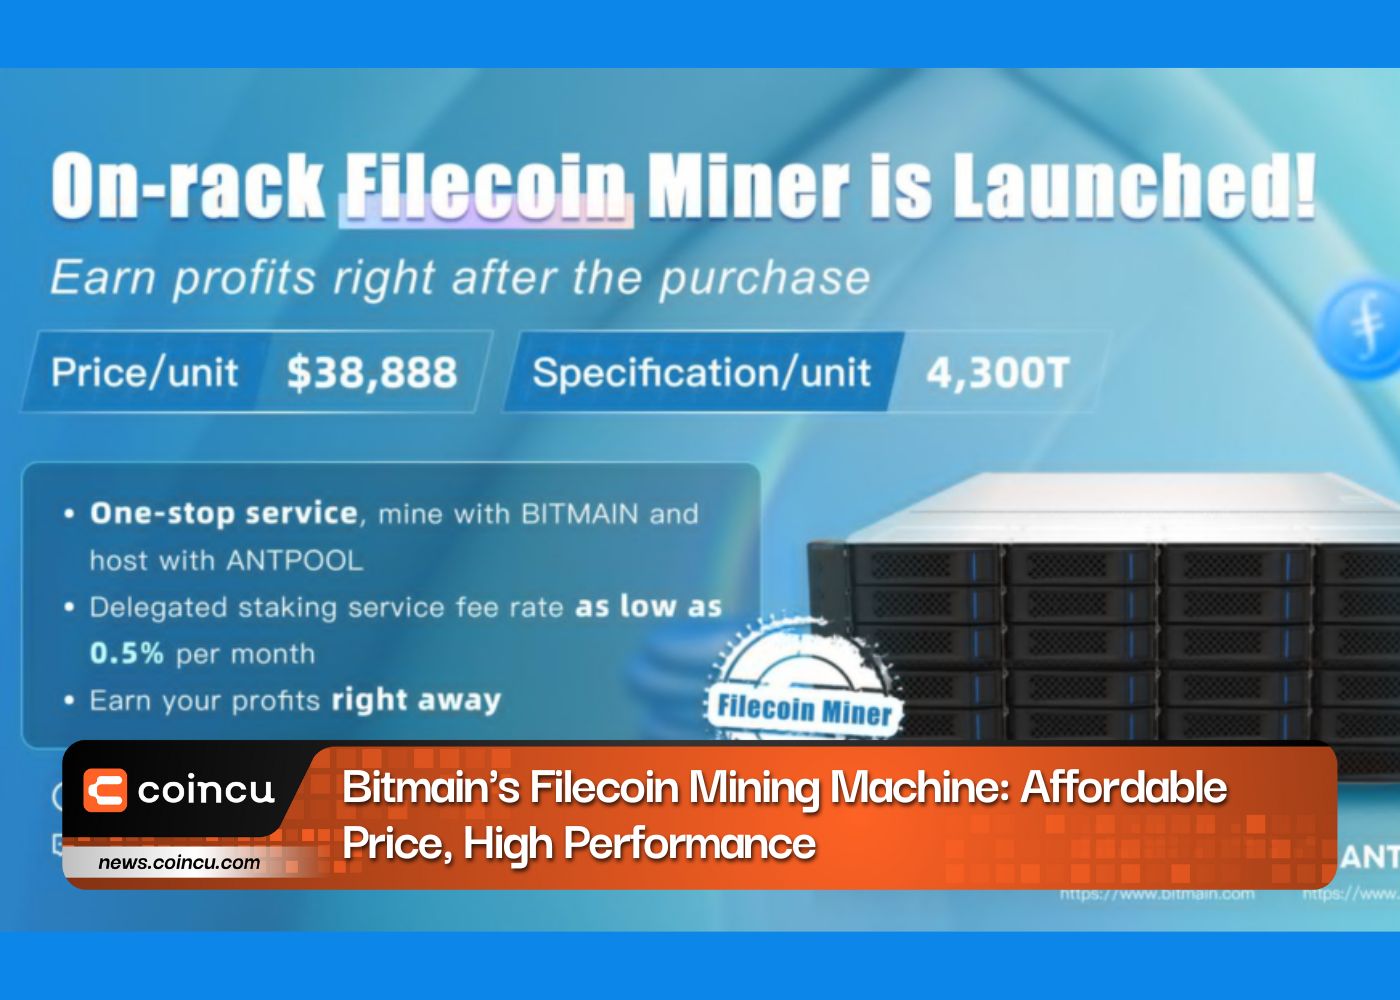 Bitmain's Filecoin Mining Machine: Affordable Price, High Performance